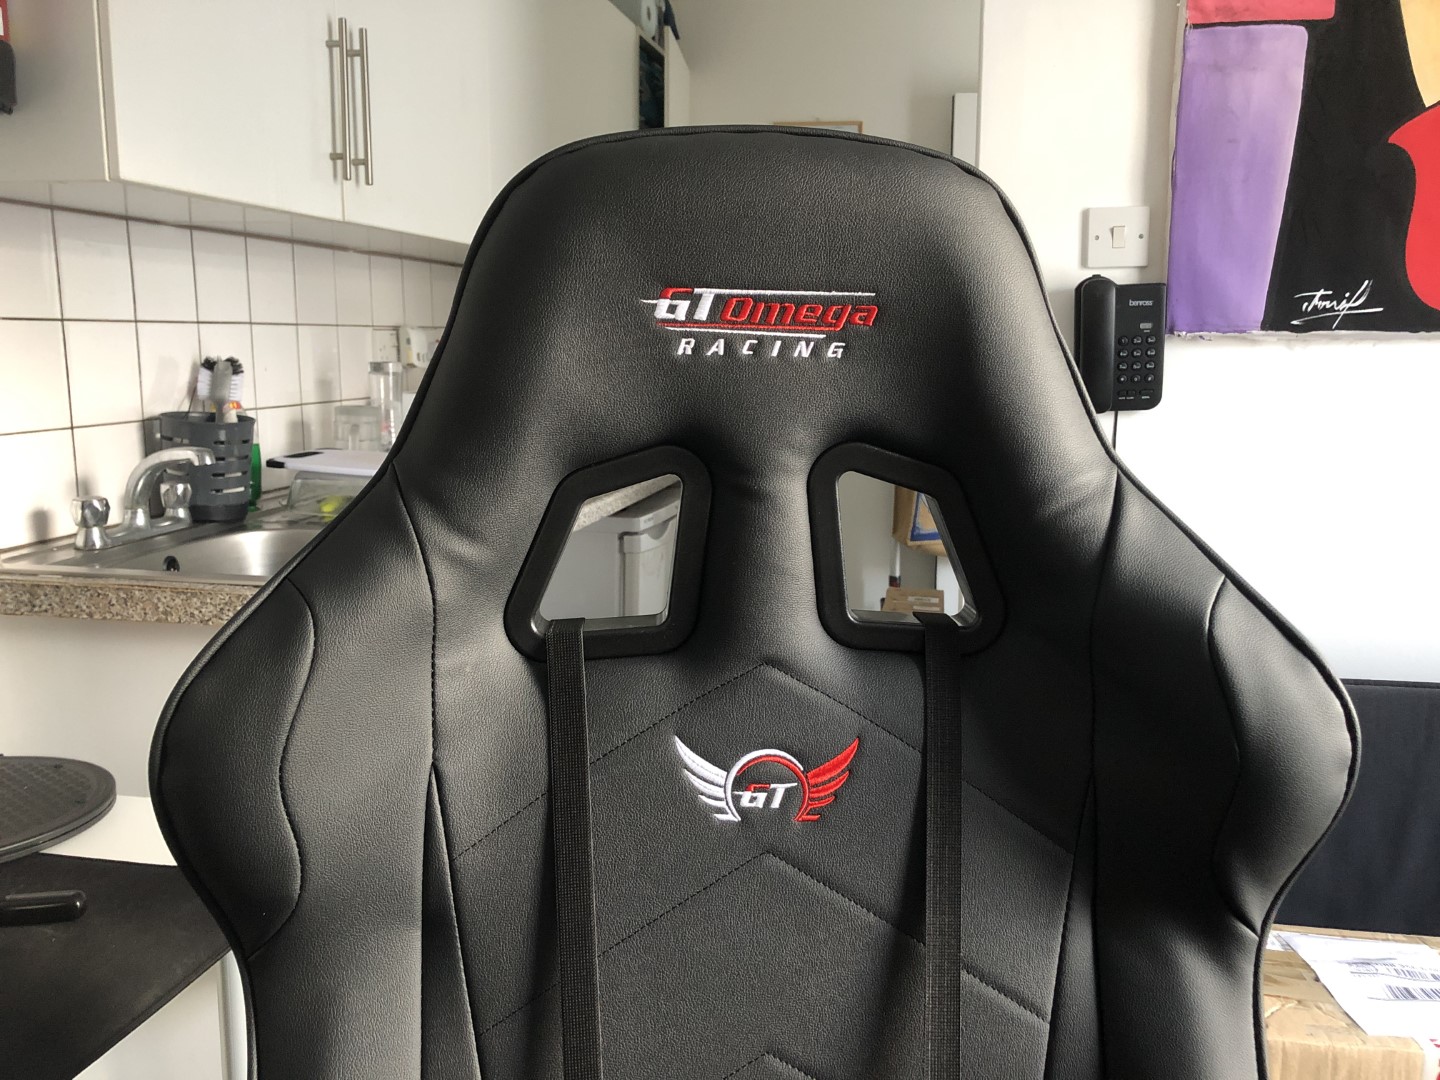 gt omega pro xl racing office chair